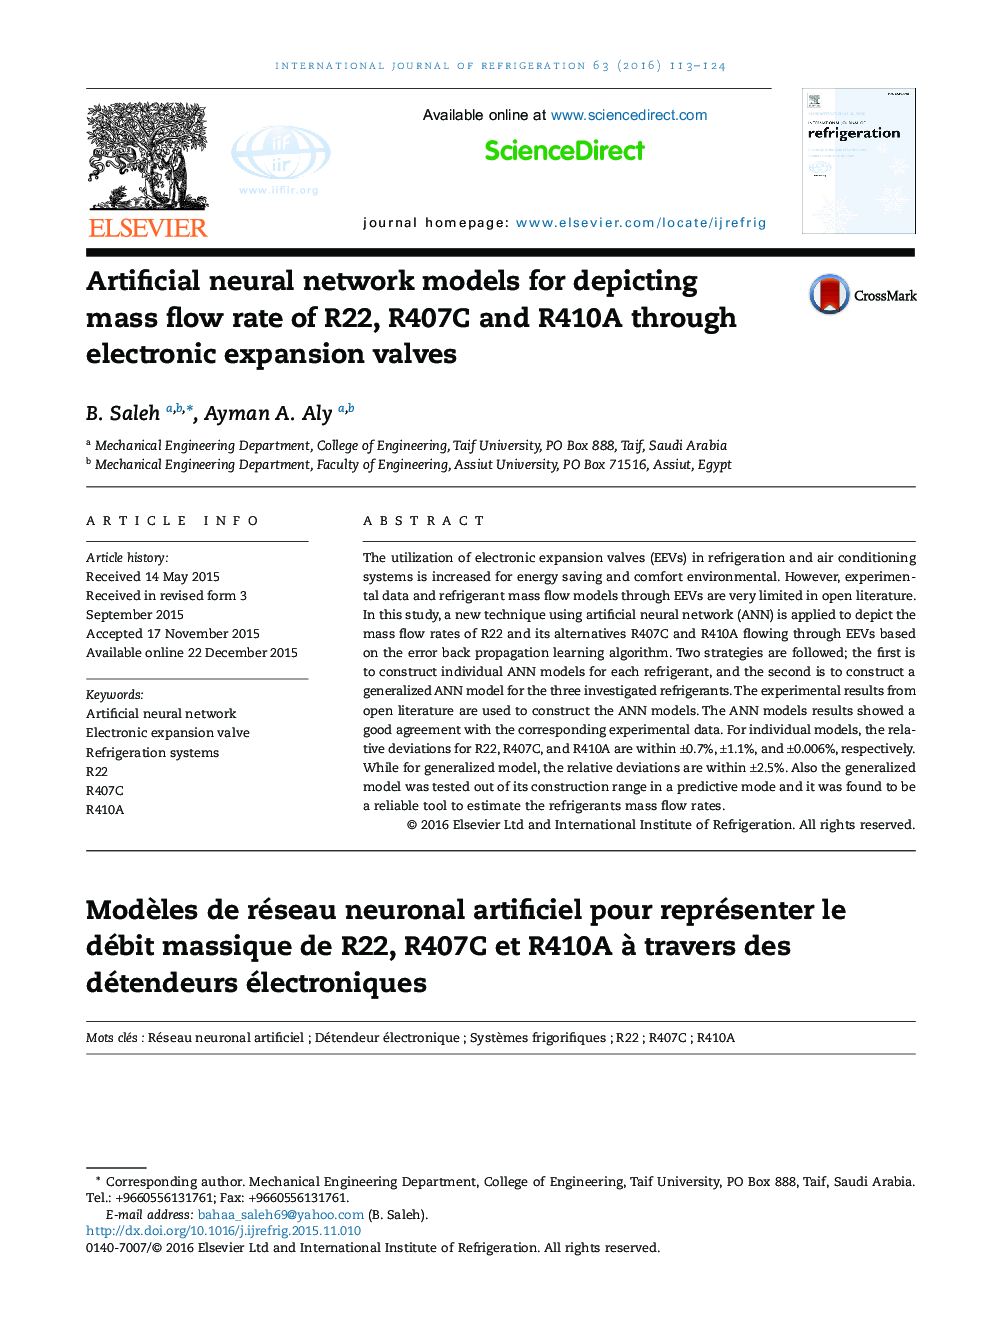 Artificial neural network models for depicting mass flow rate of R22, R407C and R410A through electronic expansion valves